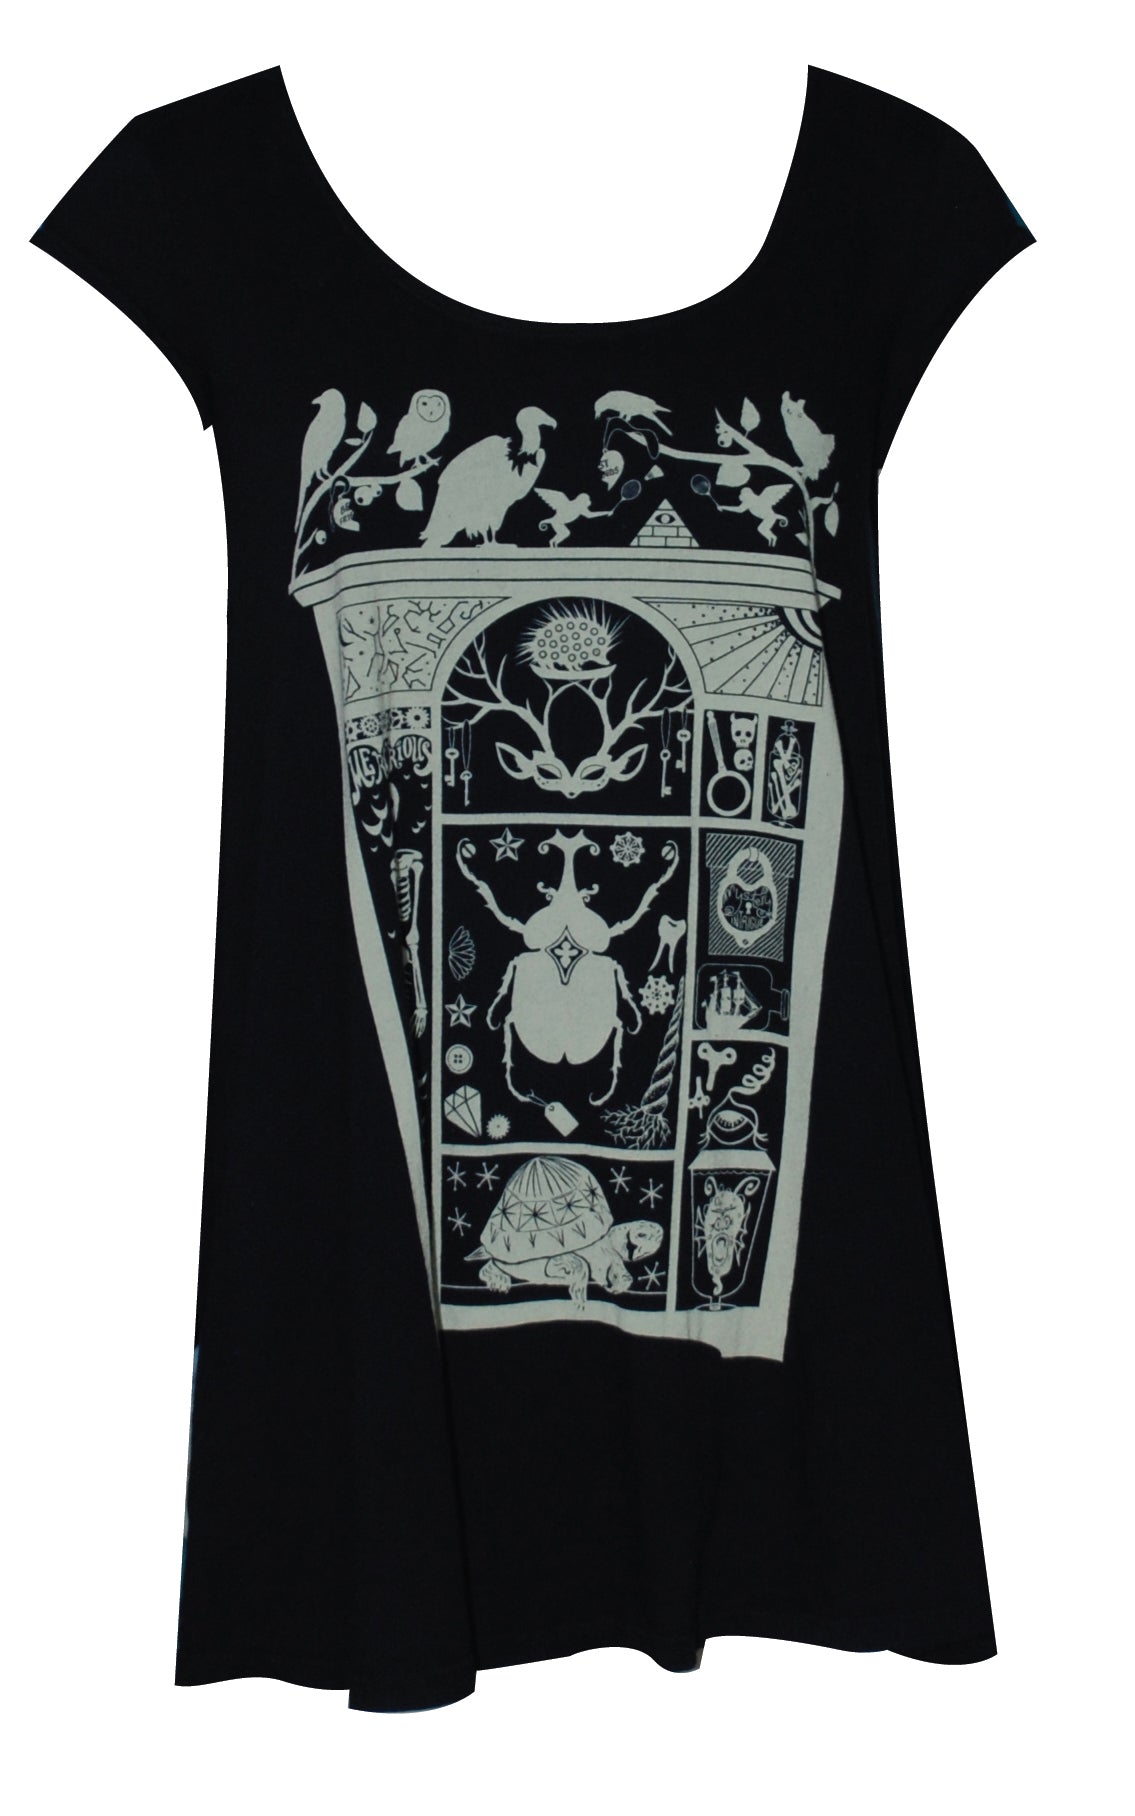 Black scoop neck cap-sleeved trapeze top with white cabinet of curiosities print